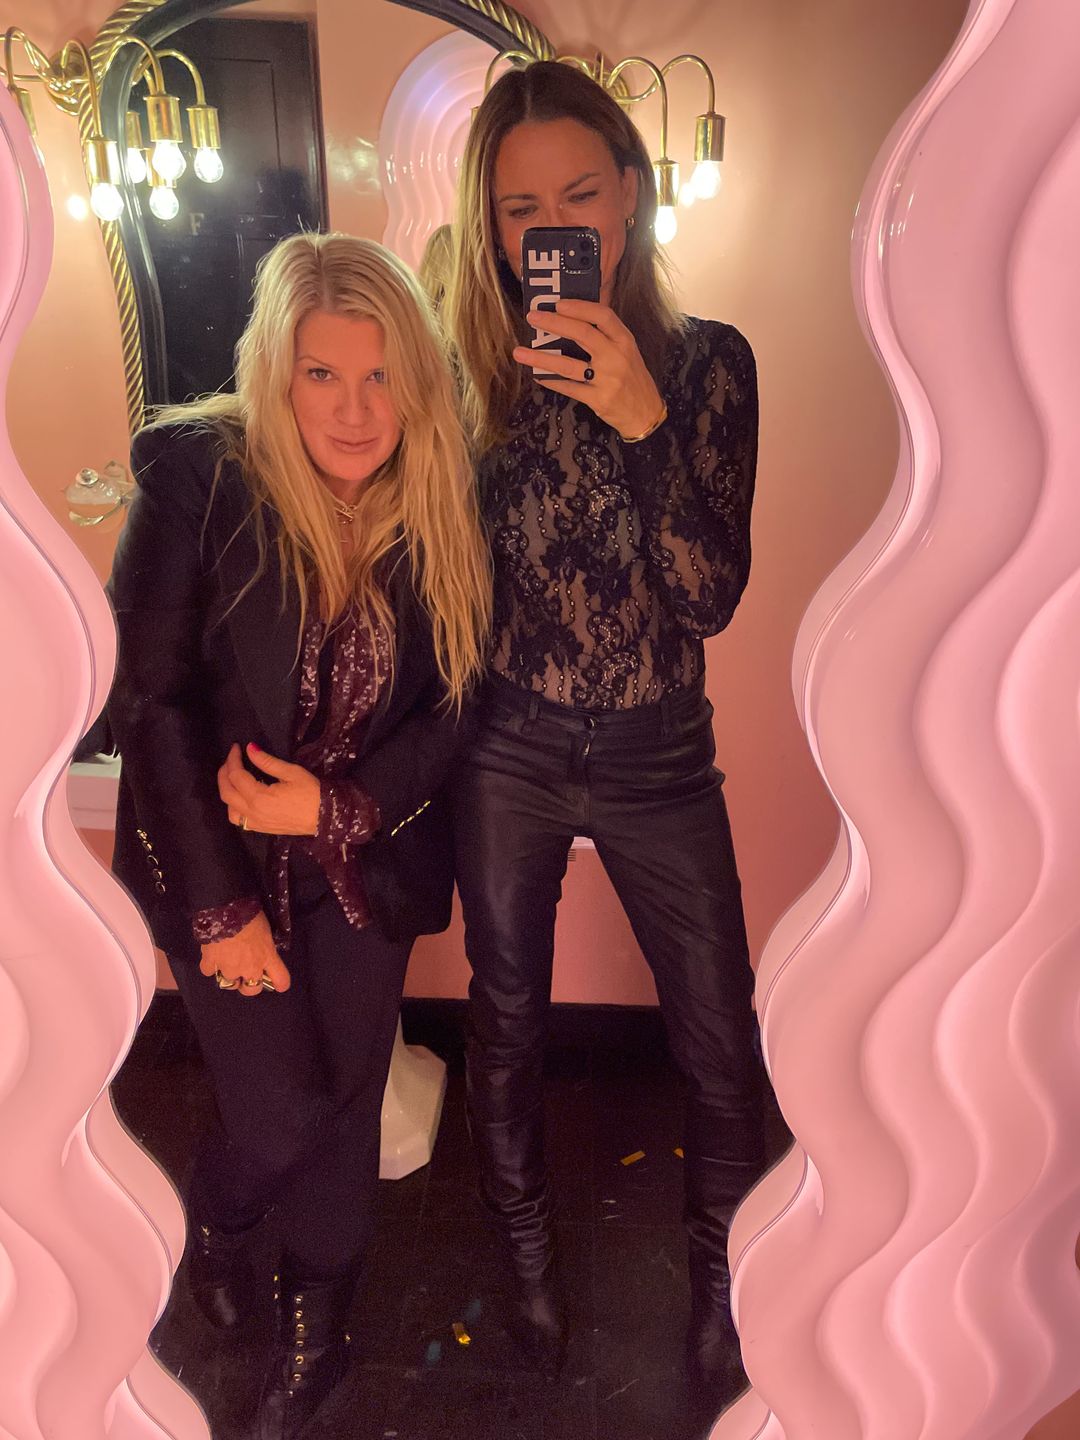 Gabriele Hackworthy poses with a friend in a mirror wearing a black lace bodysuit and leather pants